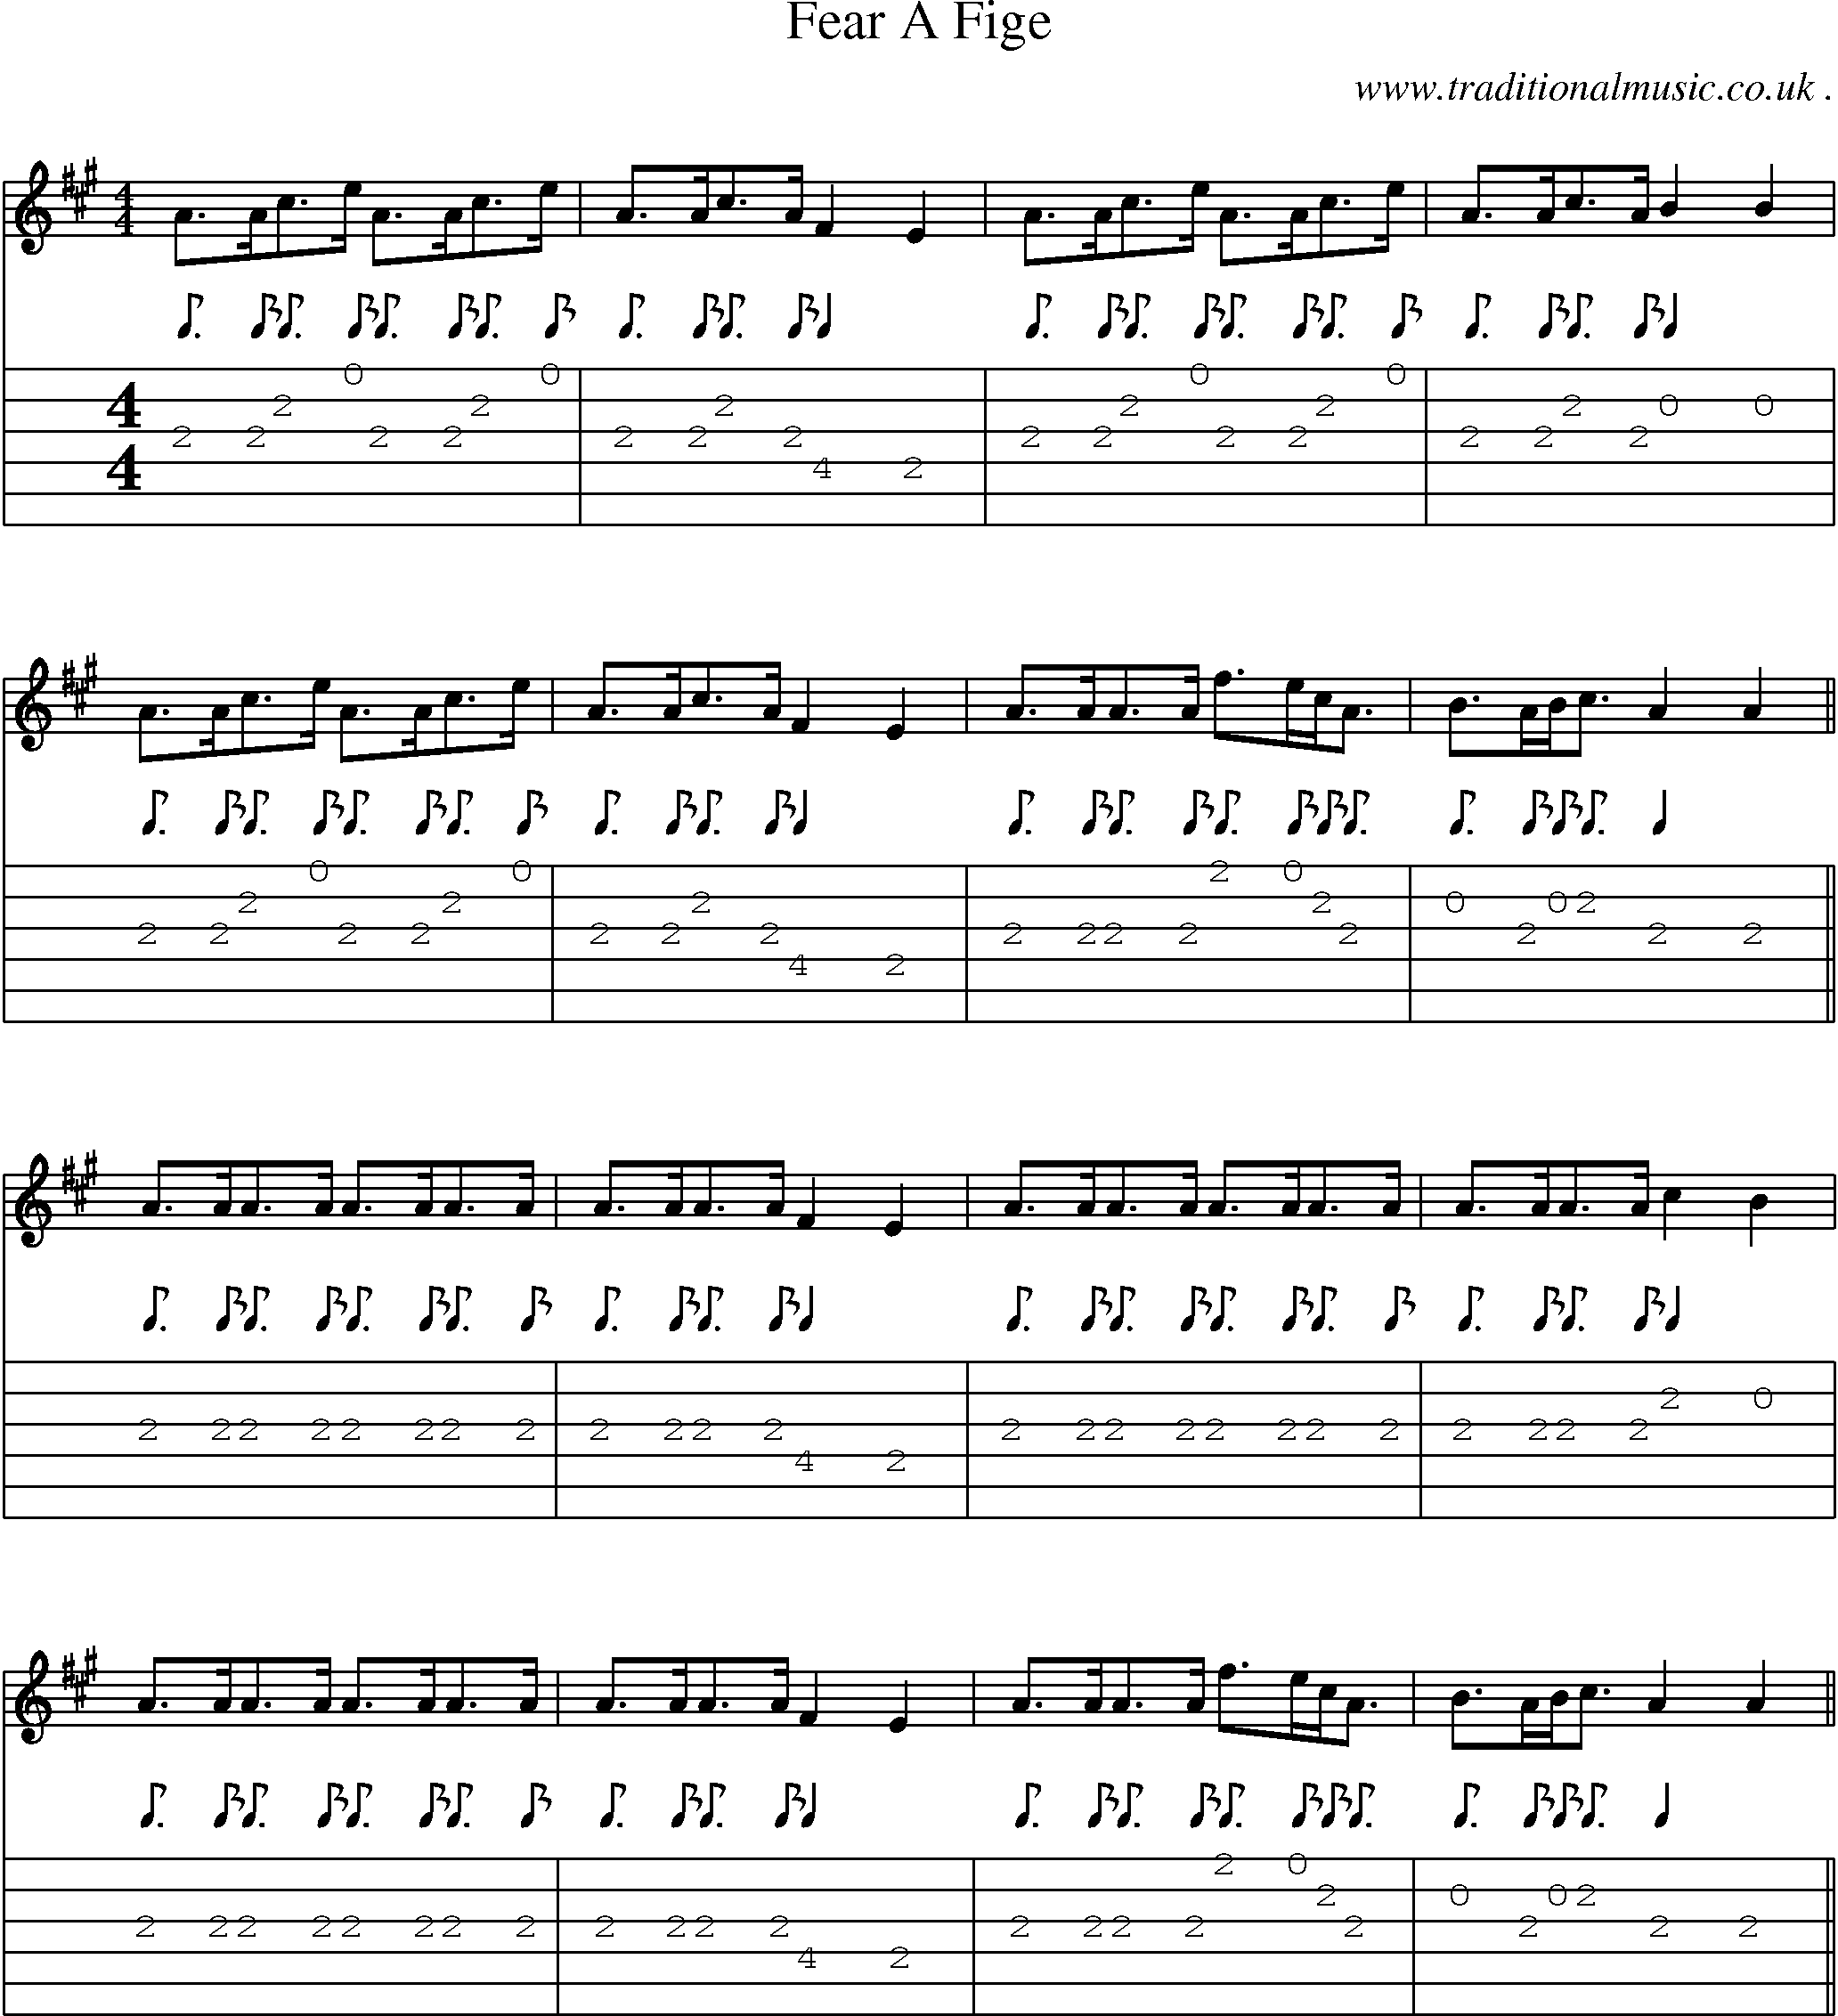 Sheet-Music and Guitar Tabs for Fear A Fige